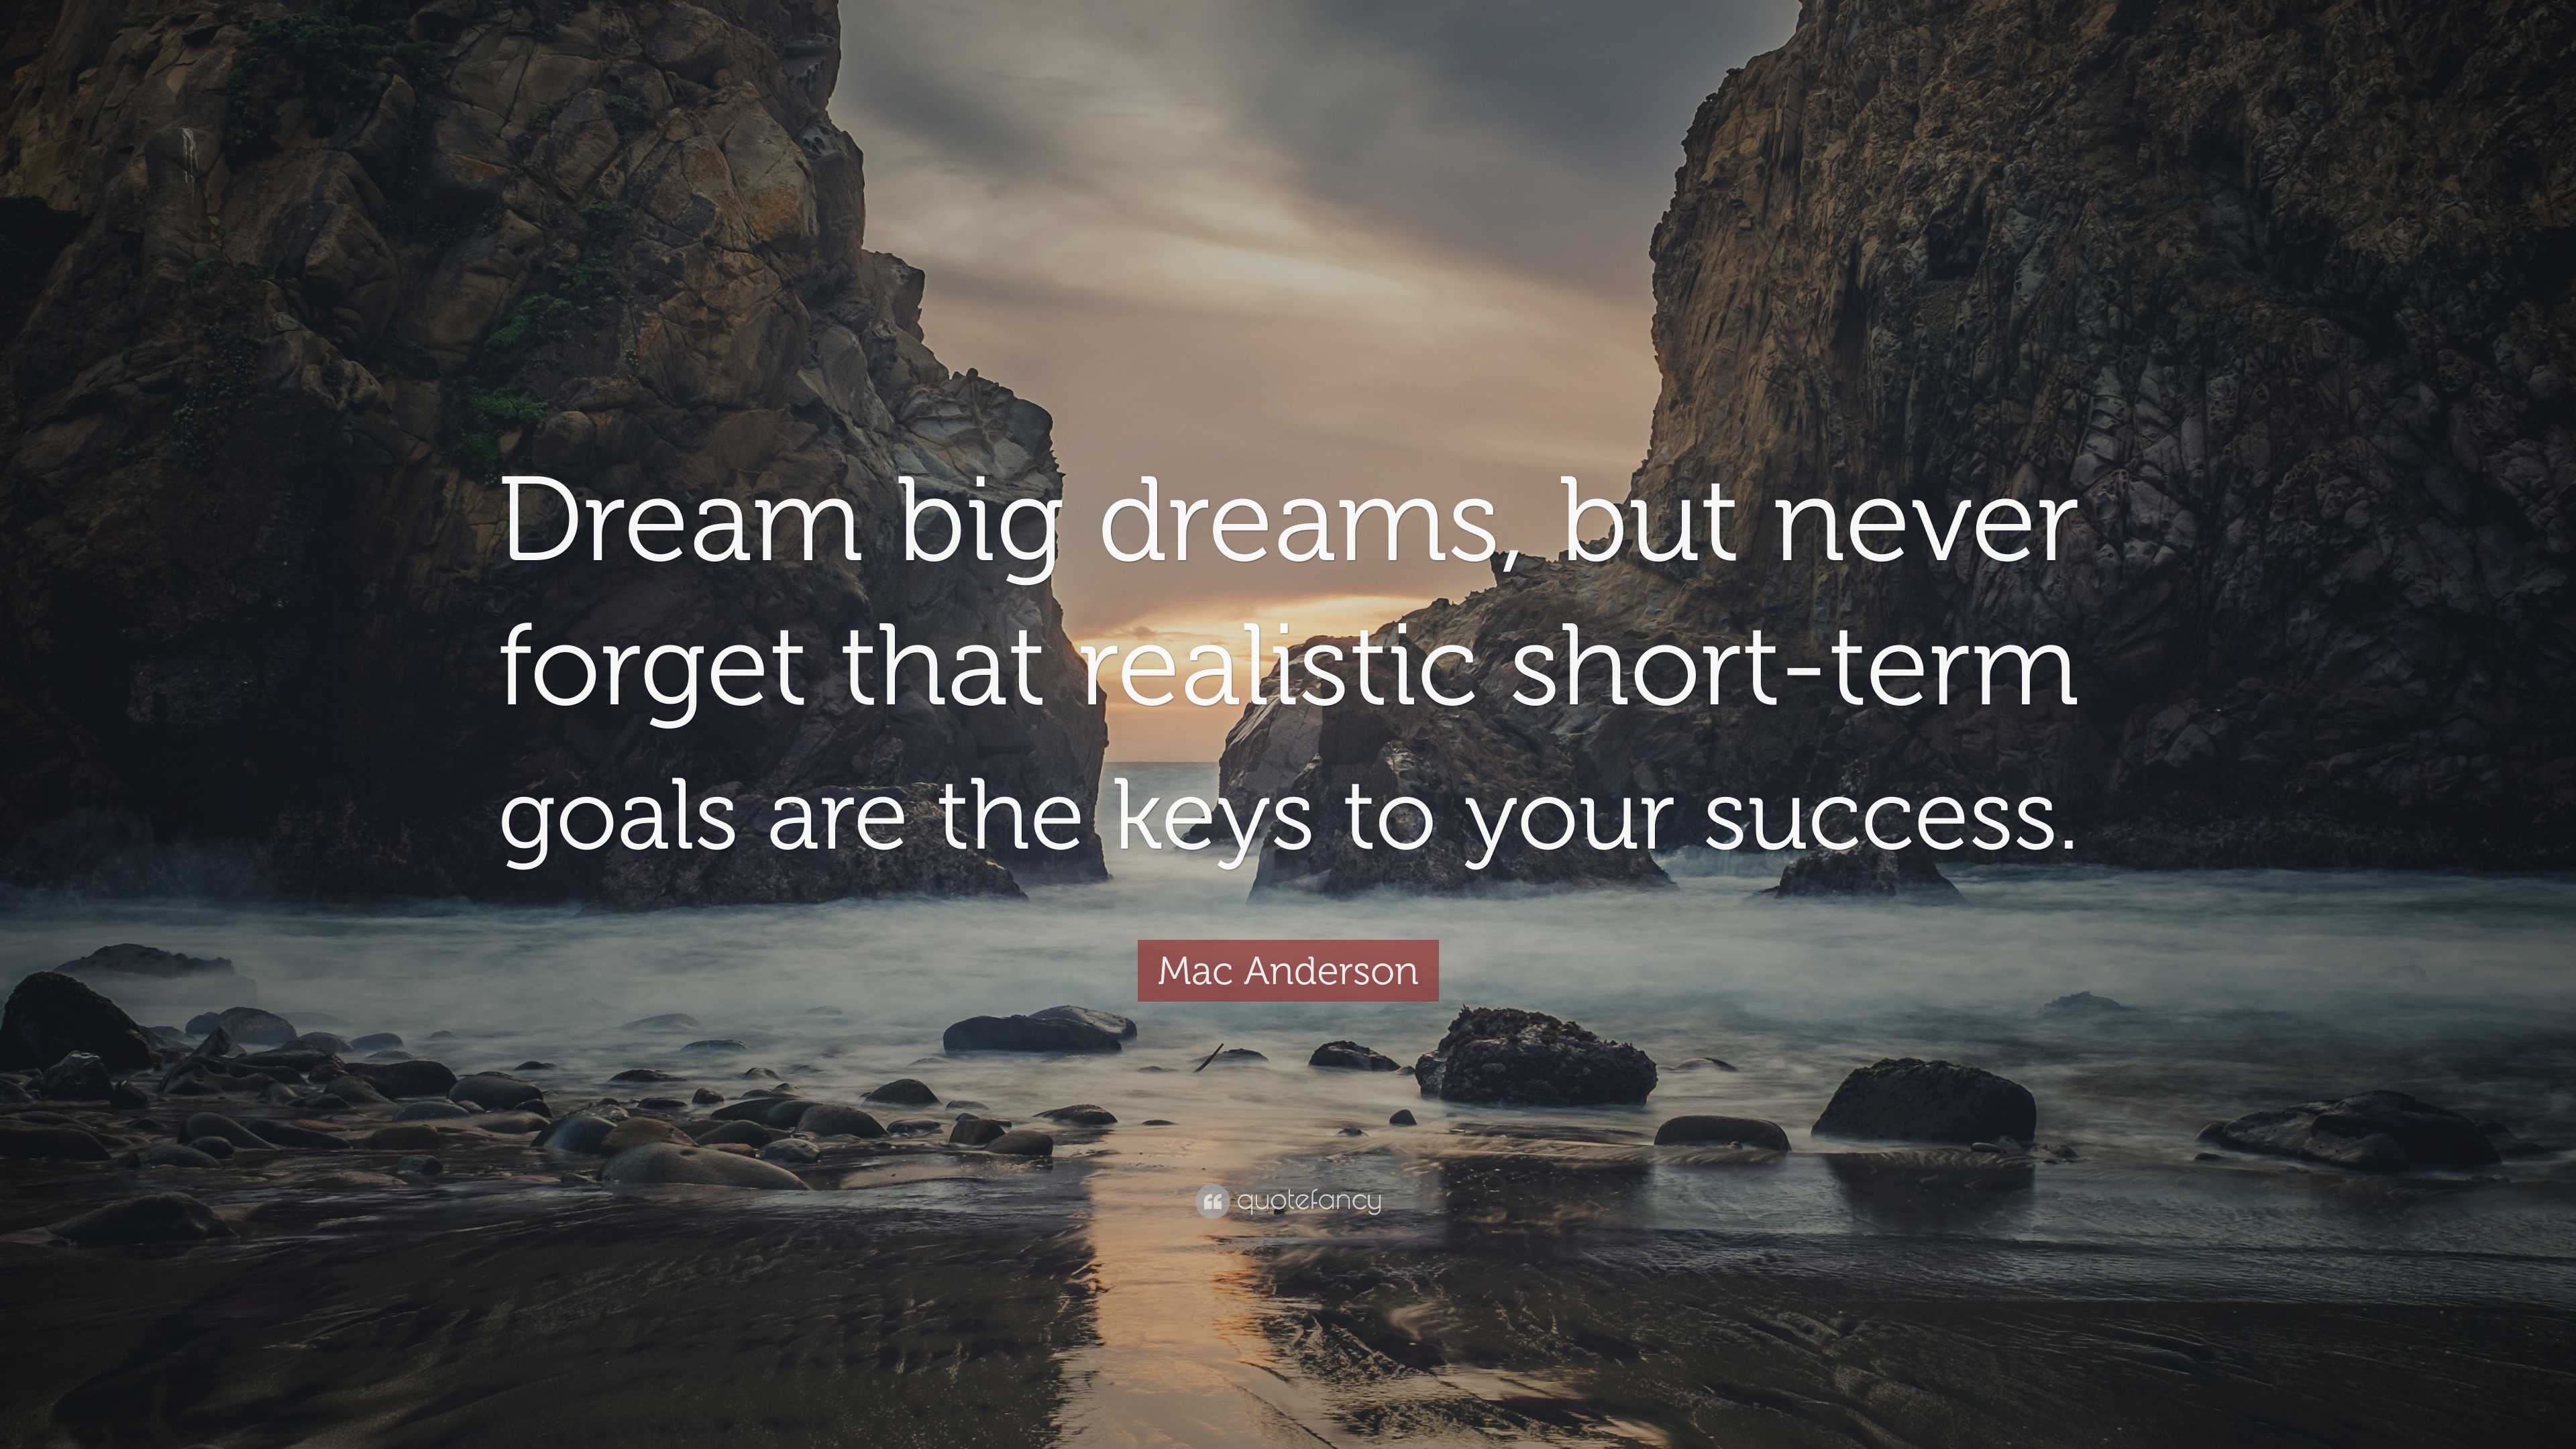 Mac Anderson Quote: “Dream big dreams, but never forget that